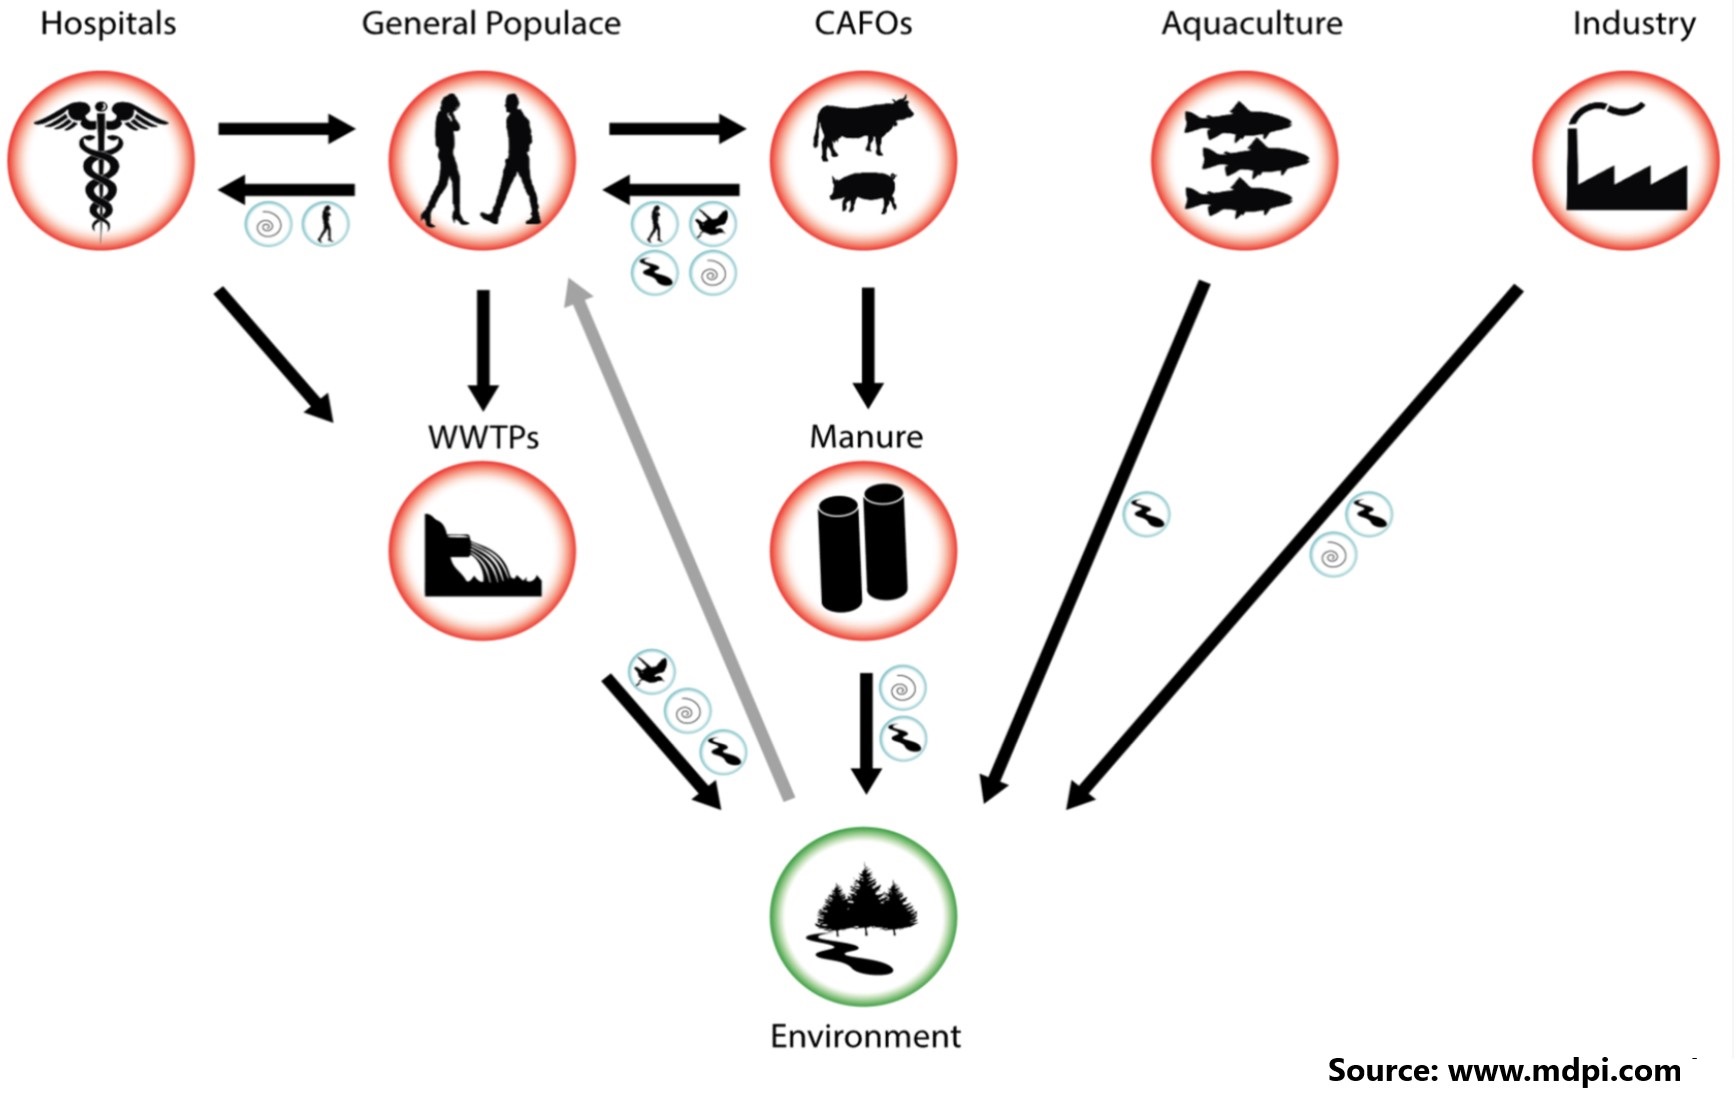 Gentamicin at Sub-Inhibitory Concentrations Selects for Antibiotic Resistance in the Environment